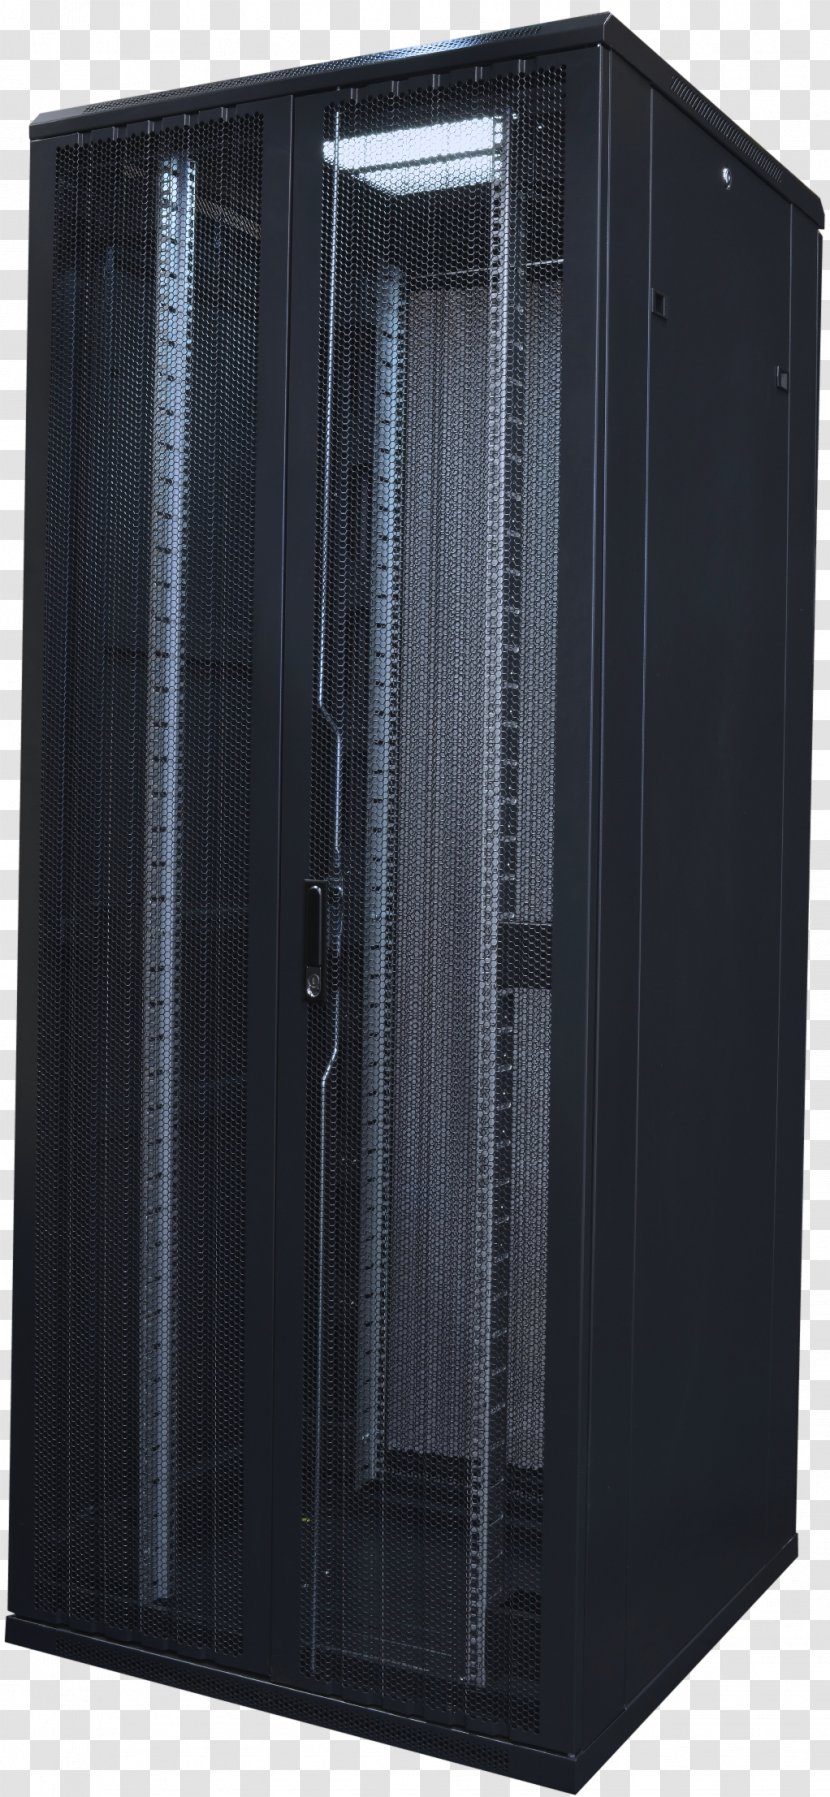 Computer Servers Cases & Housings Angle - Server Transparent PNG